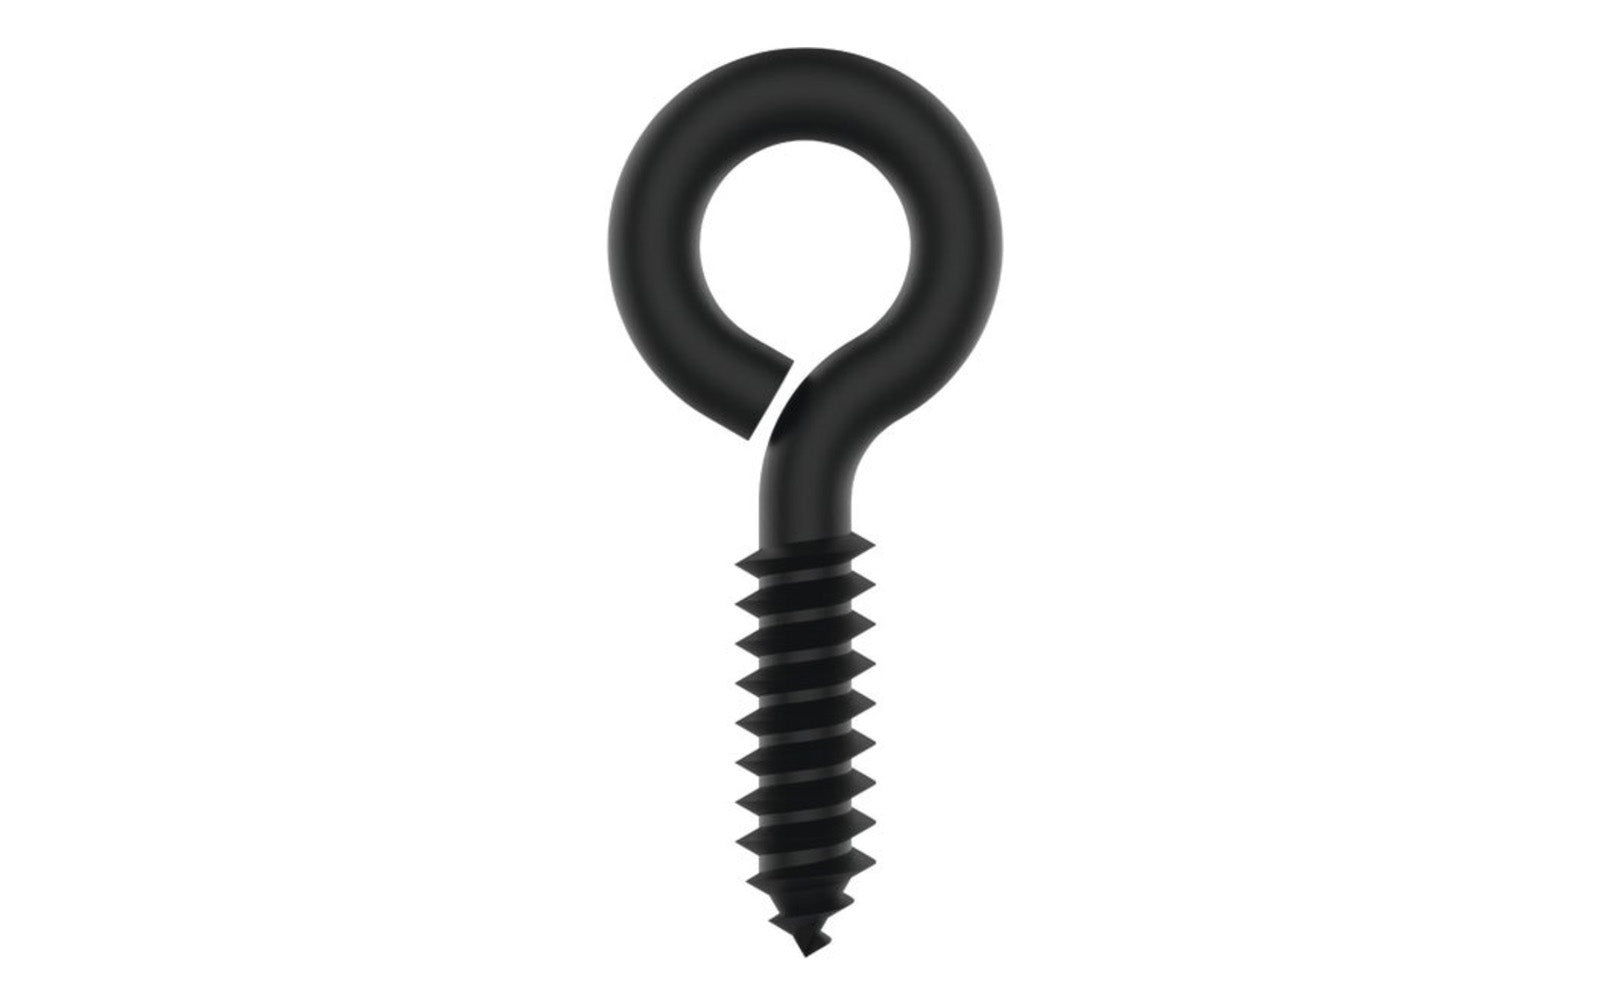 #2 Black "Storm Shine" finish Lag Screw Eye on steel material for style & resistance to corrosion & abrasion. Designed for hanging plants, signs, clotheslines, etc. Sharp screw points bite into wood easily & quickly. 2-5/8" overall length. 1/4" thickness diameter. National Hardware Model No. N820-089. 886780030013